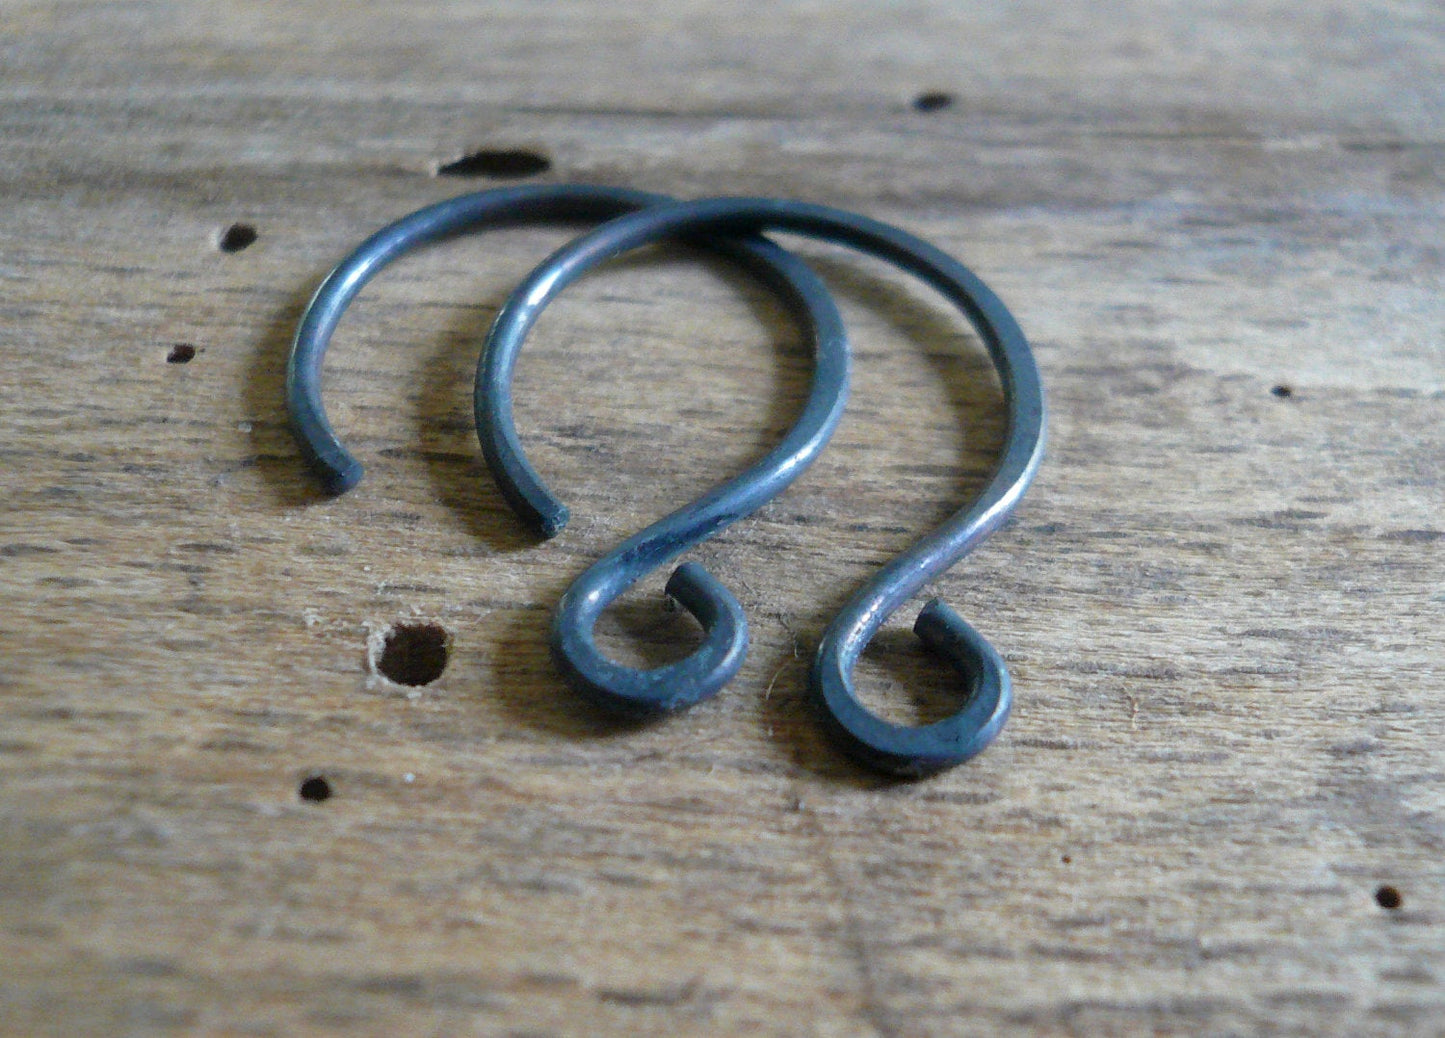 HEAVY 18 gauge Large Solitude Sterling Silver Earwires - Handmade. Handforged. Oxidized & polished